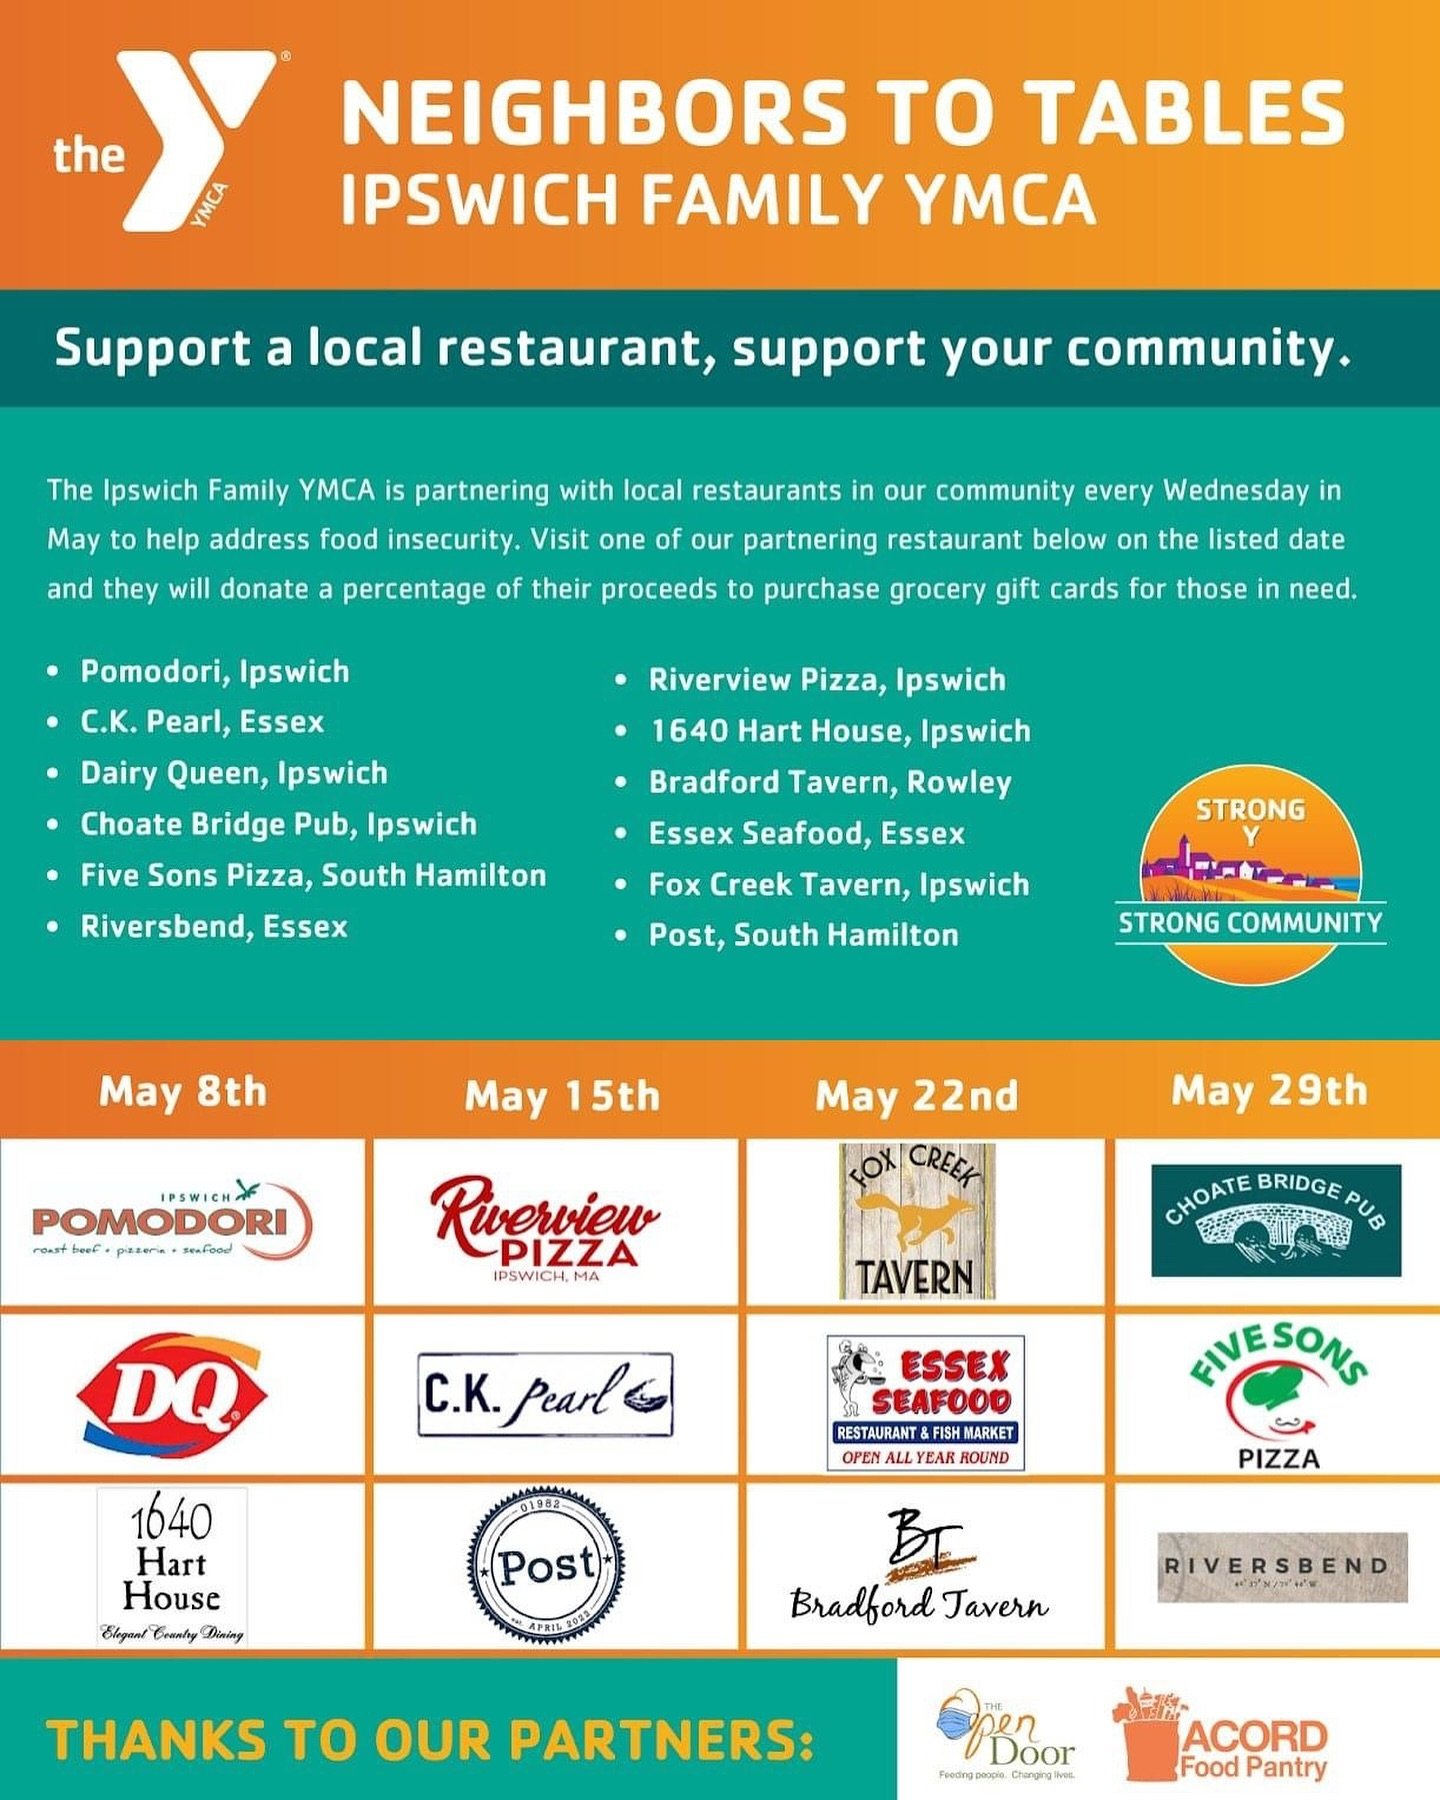 Support a local restaurant, and you will be supporting the community. The Ipswich Family YMCA  has partnered with local restaurants every Wednesday in May to help address food insecurity. Visit one of our partnering restaurants below on the listed da